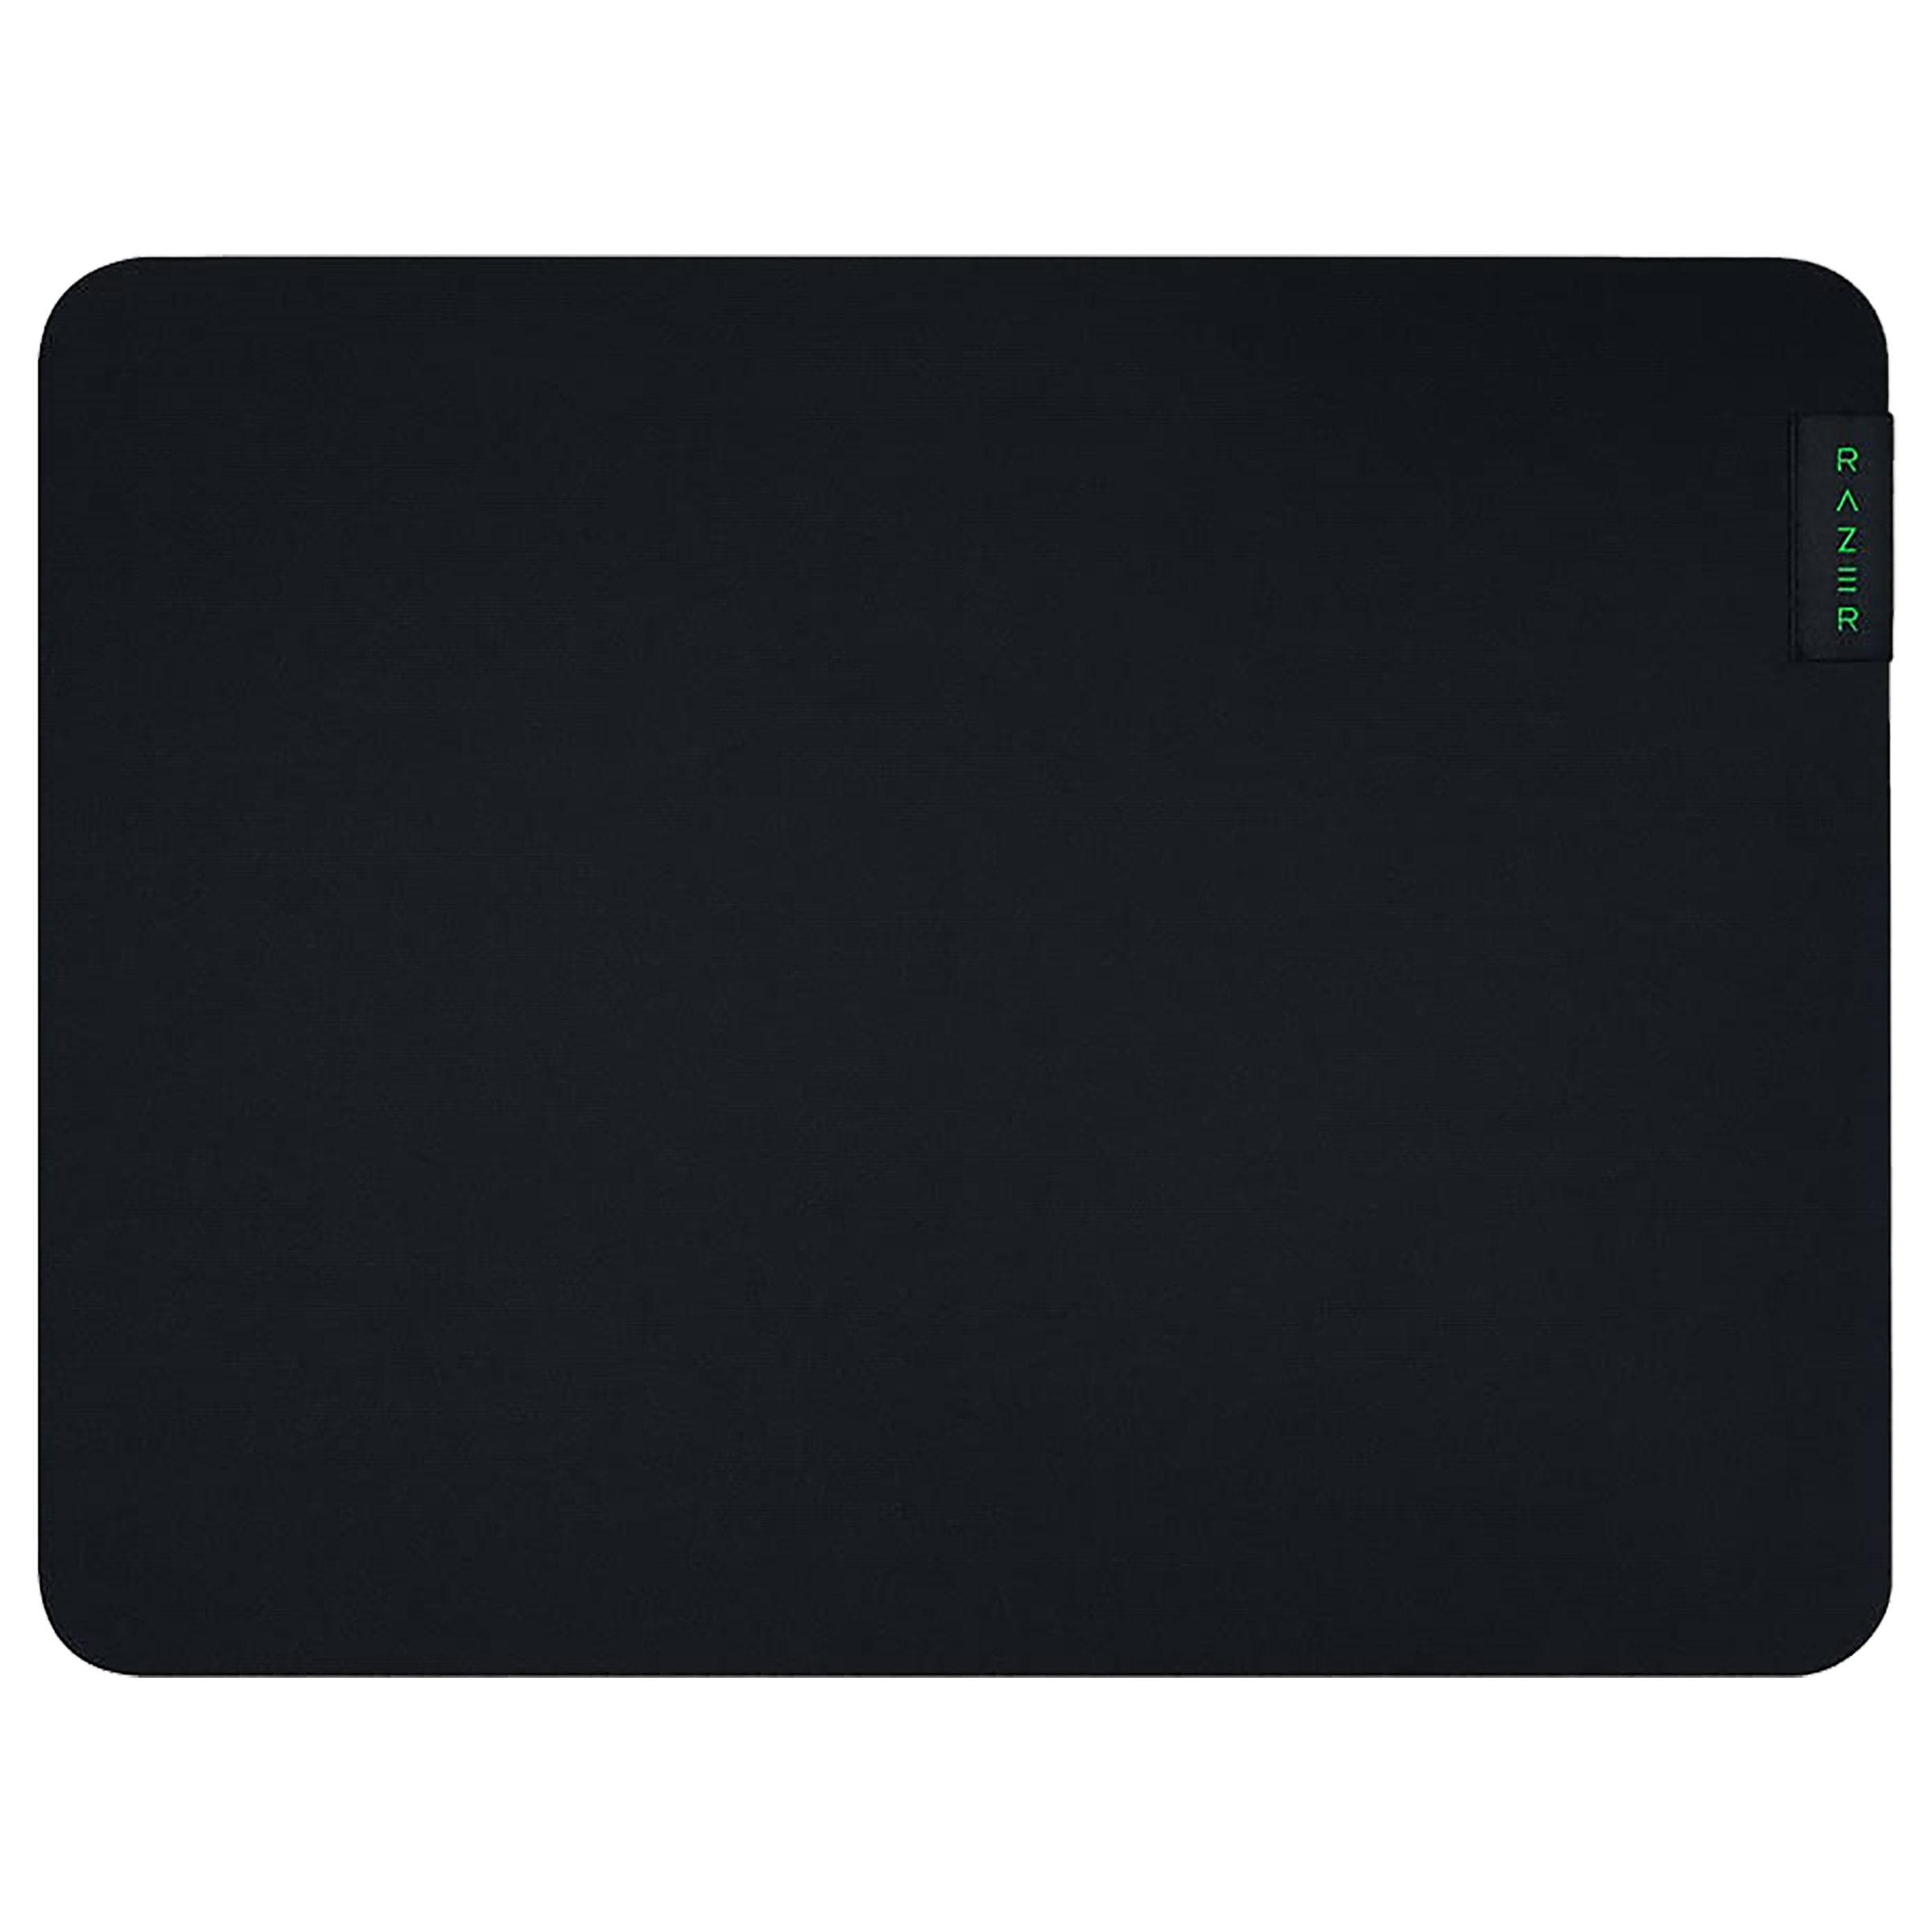 Buy Razer Gigantus Mouse Pad For Mouse (Thick, High-Density Rubber Foam,  RZ02-03330200-R3M1, Black) Online - Croma